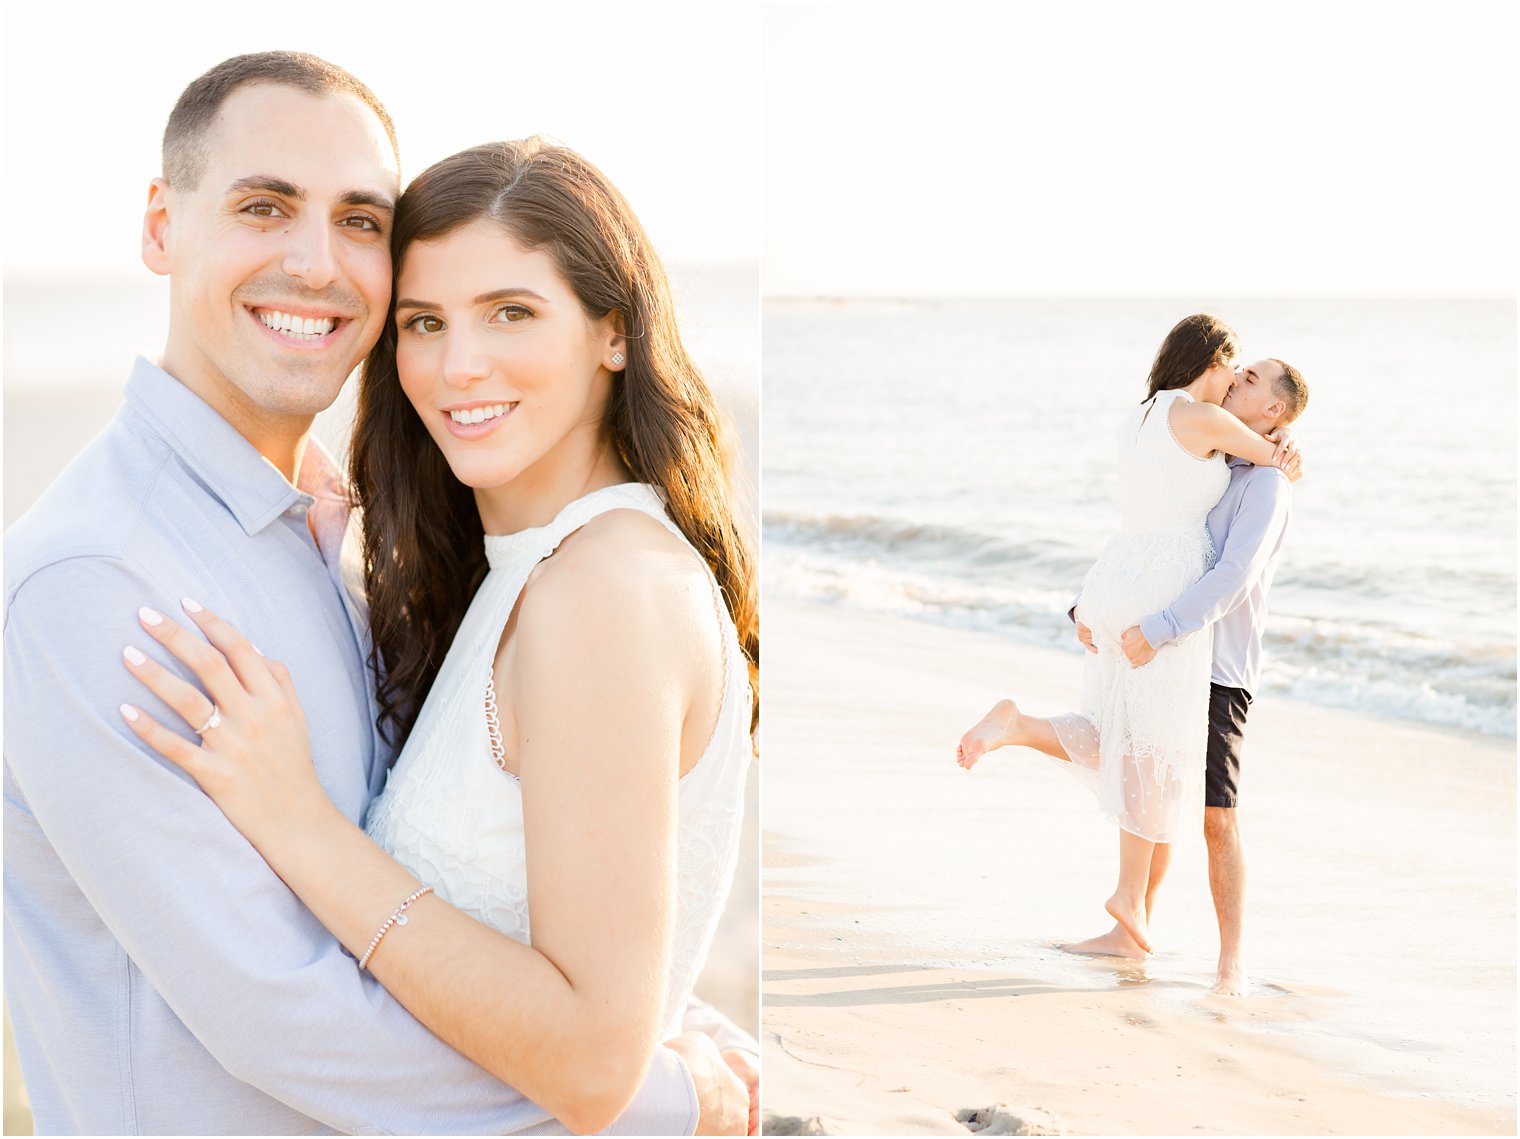 Posed and candid engagement photography in Cape May